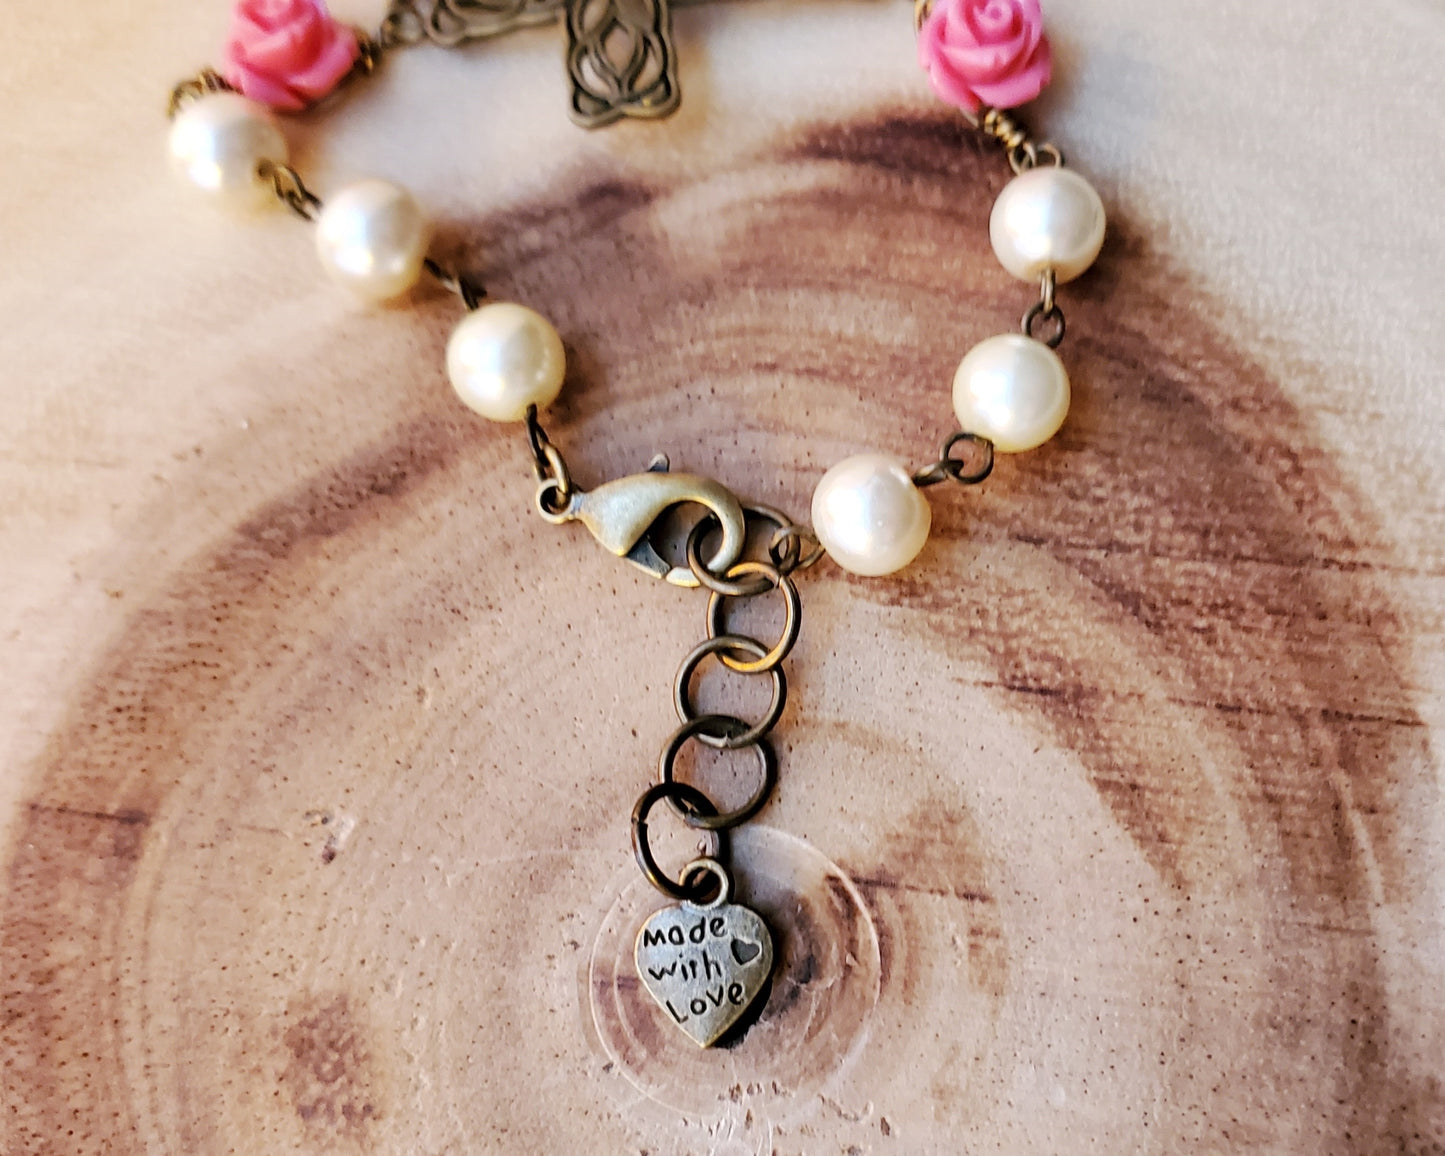 Garden of Faith Pearl Rose Sideways Cross Butterfly Heart Bracelet made with Upcycled Vintage Faux Pearls